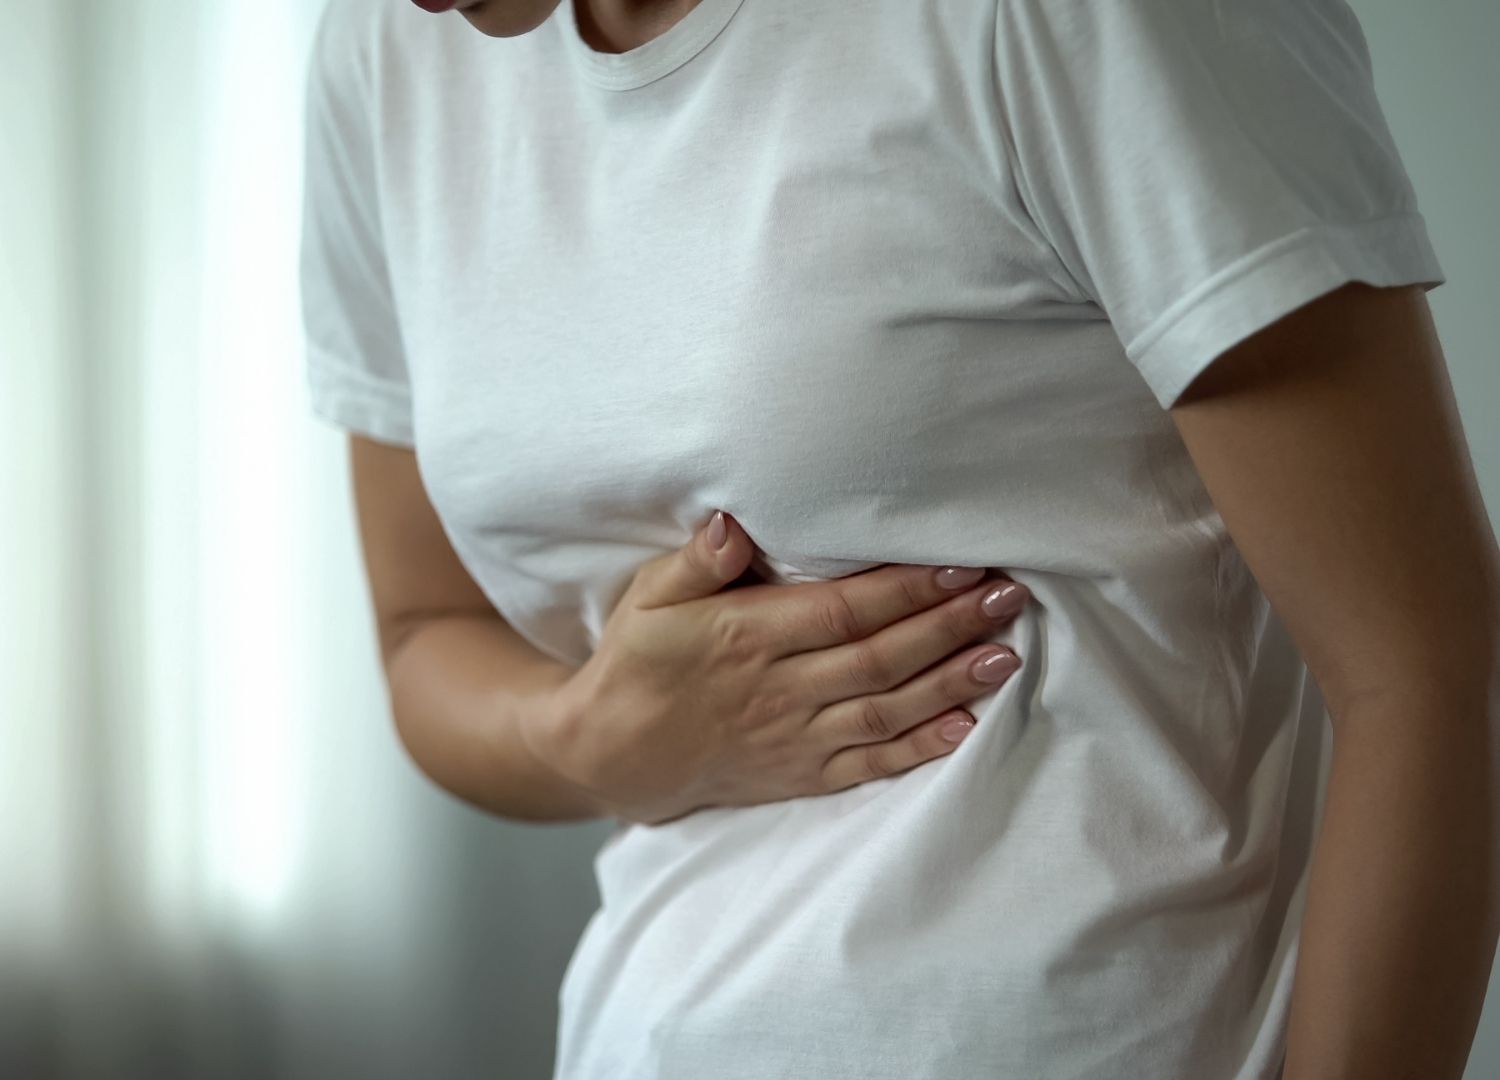 What to do when I have Peptic Ulcers